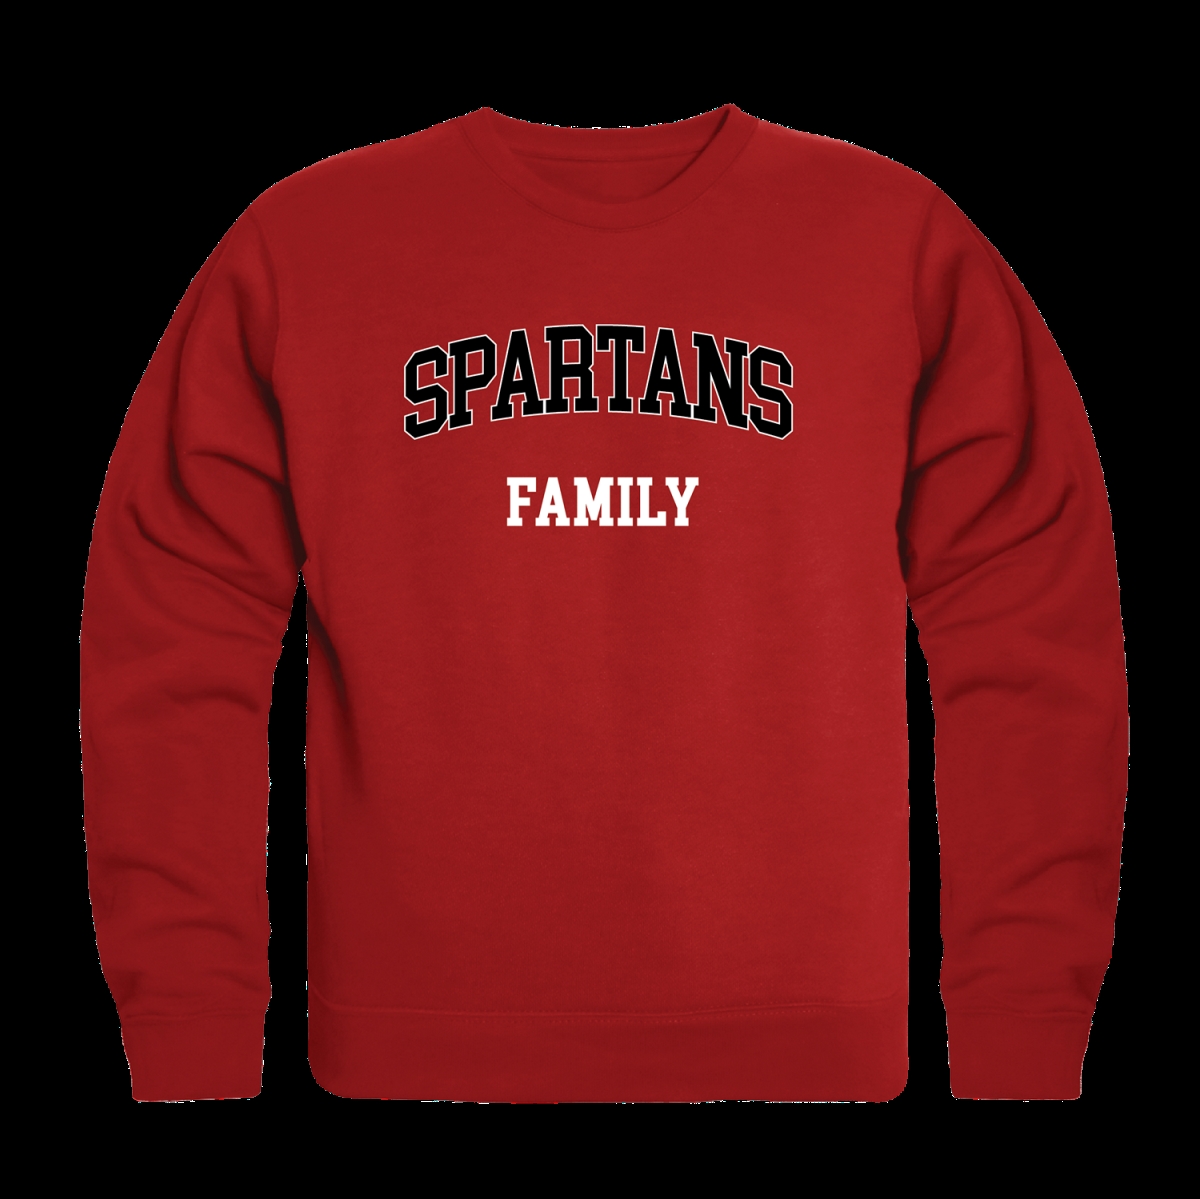 W Republic 572-448-RED-03 University of Tampa Spartans Family Crewneck Sweatshirt&#44; Red - Large